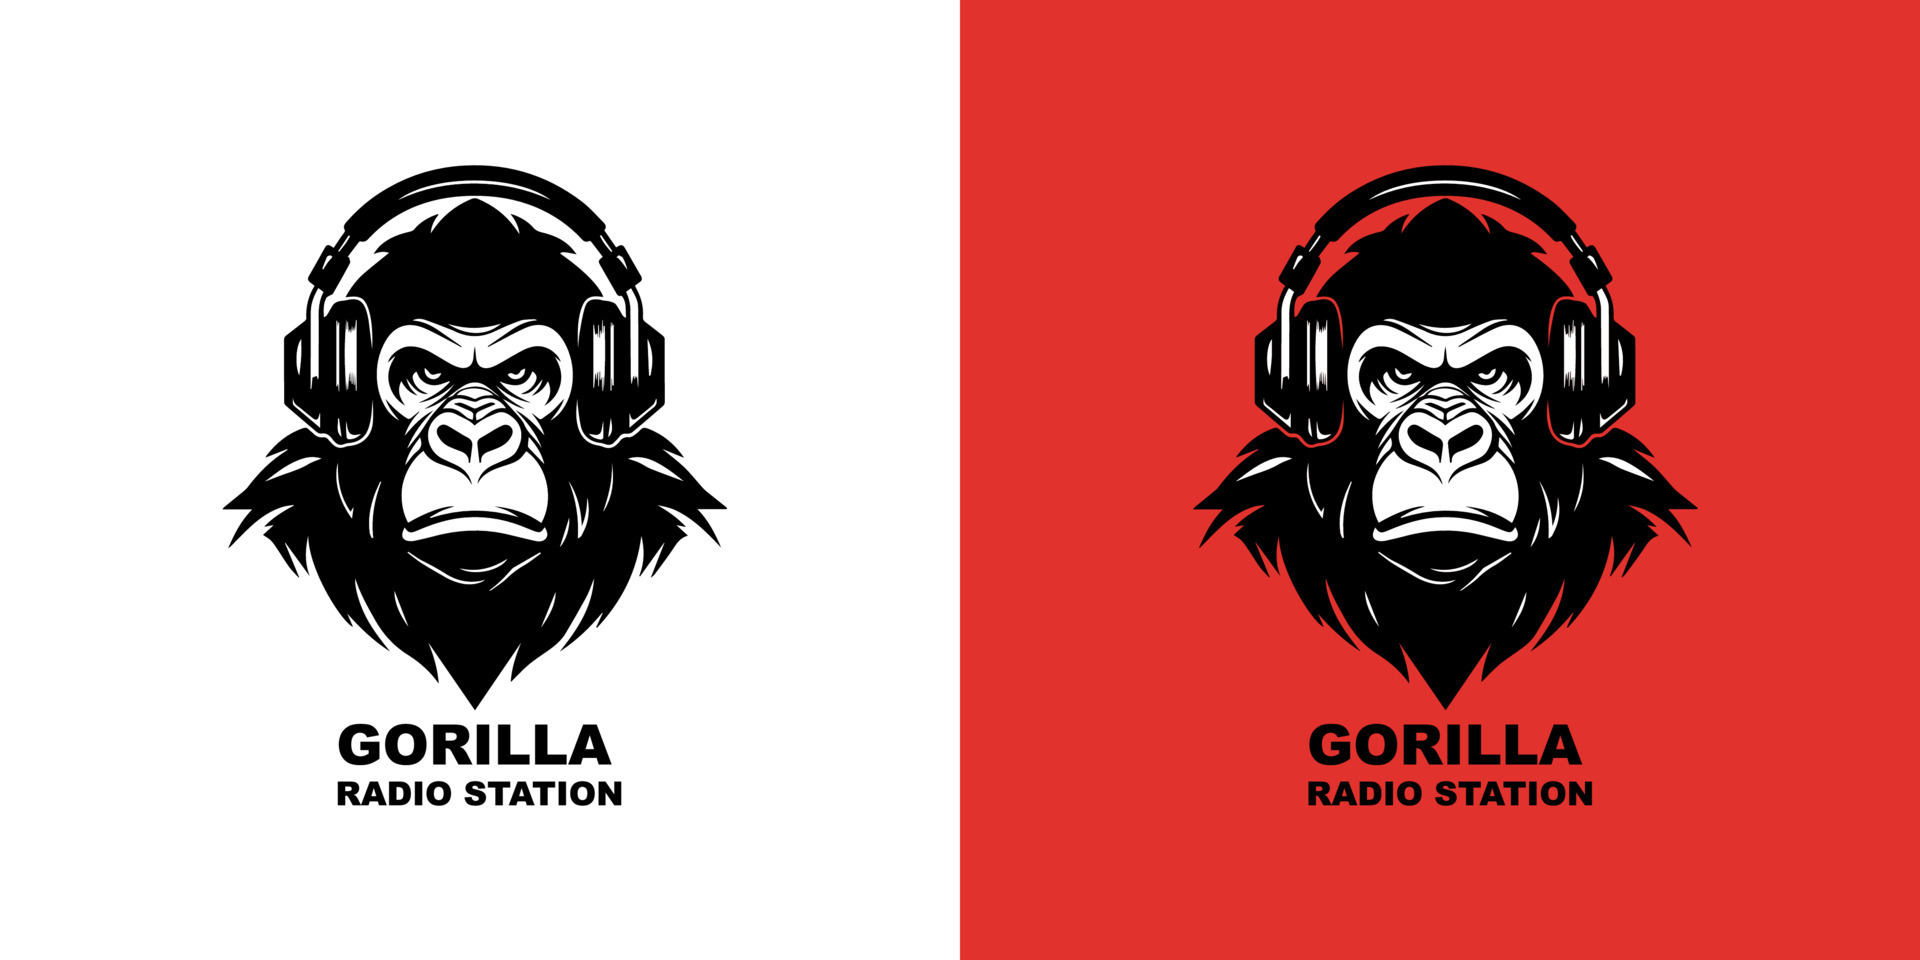 https://static.vecteezy.com/system/resources/previews/024/658/472/original/a-gorilla-wearing-headphones-logotype-on-red-and-white-background-logo-mark-vector.jpg